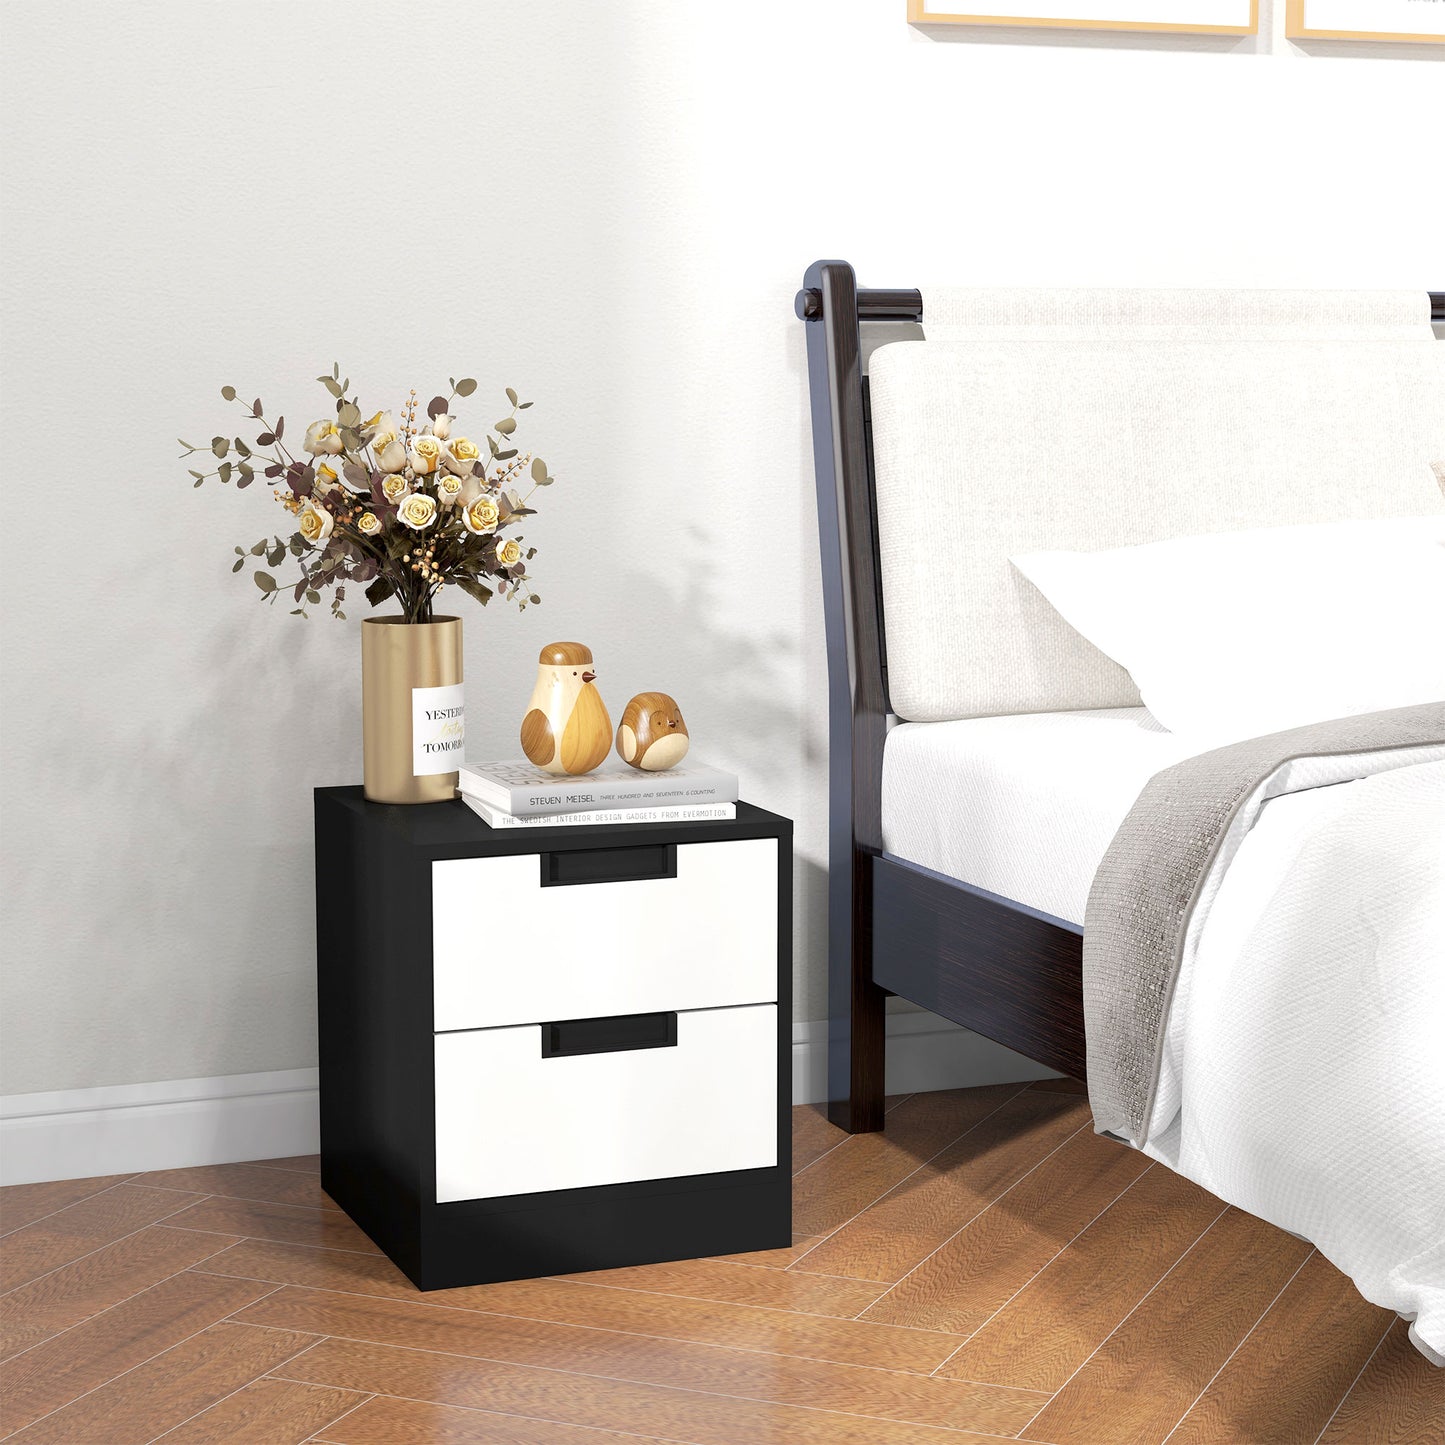 HOMCOM Bedside Tables Set of 2, Nightstands with 2 Drawers, Modern Bedside Cabinets with Storage for Bedroom, Living Room, White and Black